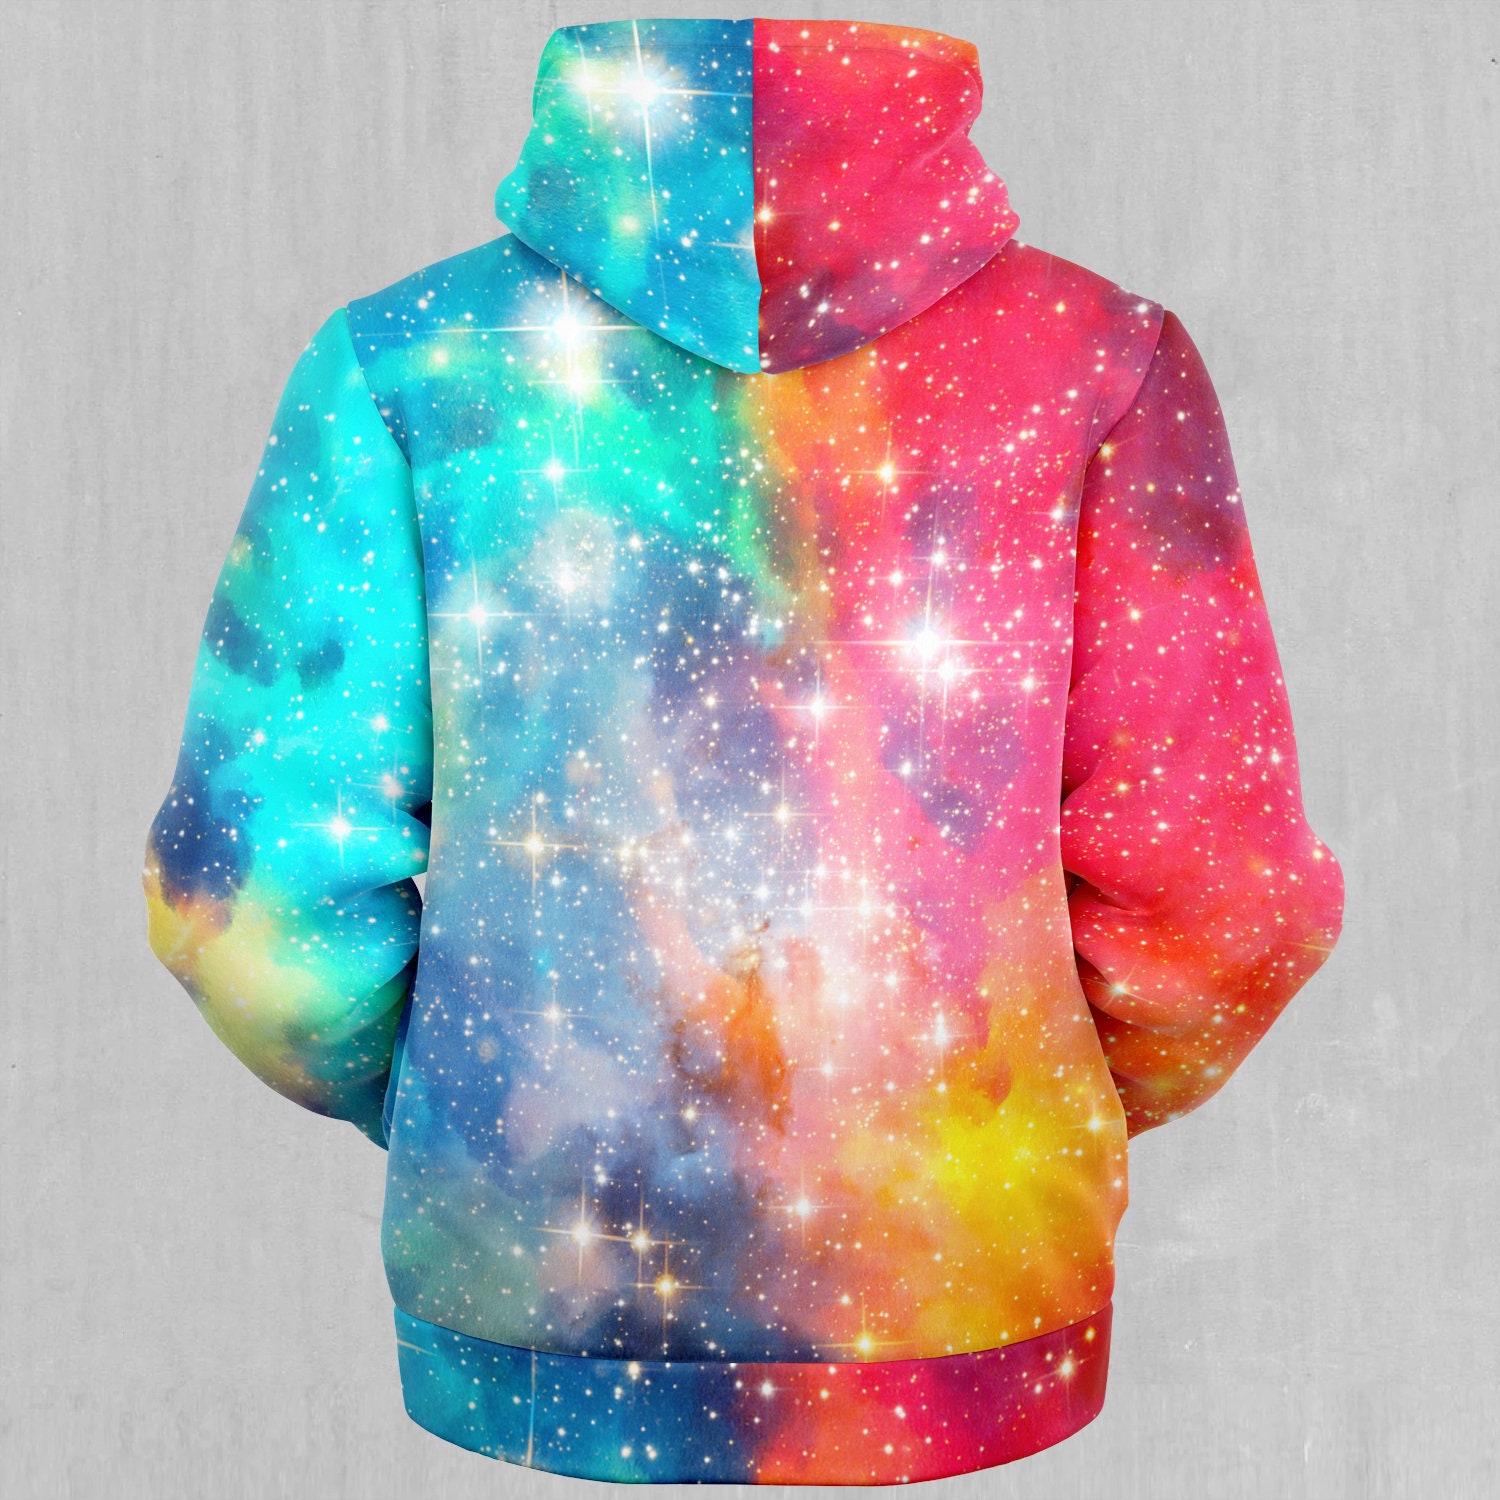 Discover Fire and Ice Galaxy Outer Space Nebula Abstract Sherpa Microfleece Zip-Up Hoodie